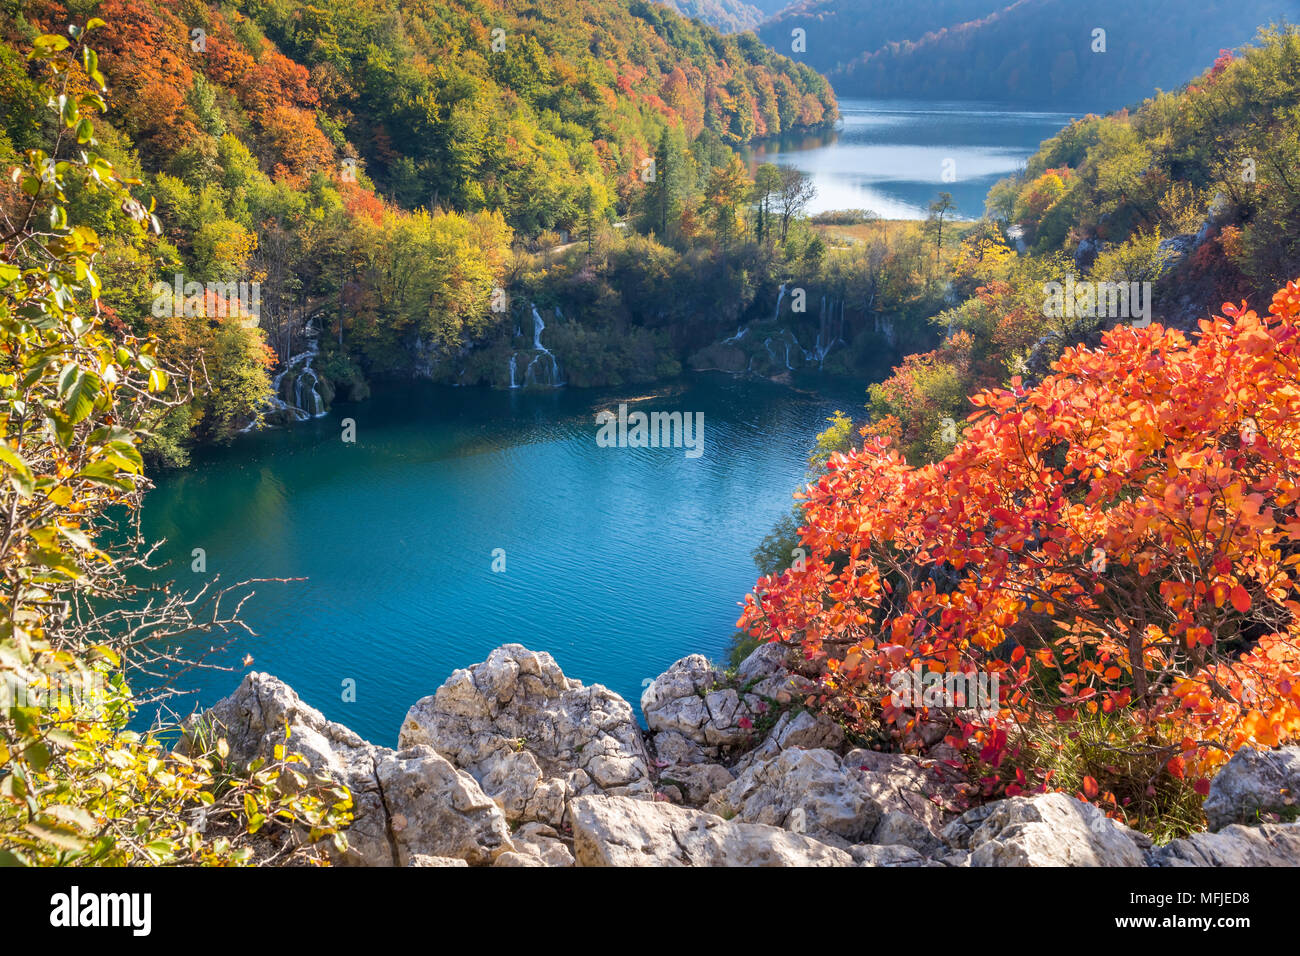 Elevated view from a lookout over the Lower Lakes inside Plitvice Lakes National Park, UNESCO World Heritage Site, Croatia, Europe Stock Photo